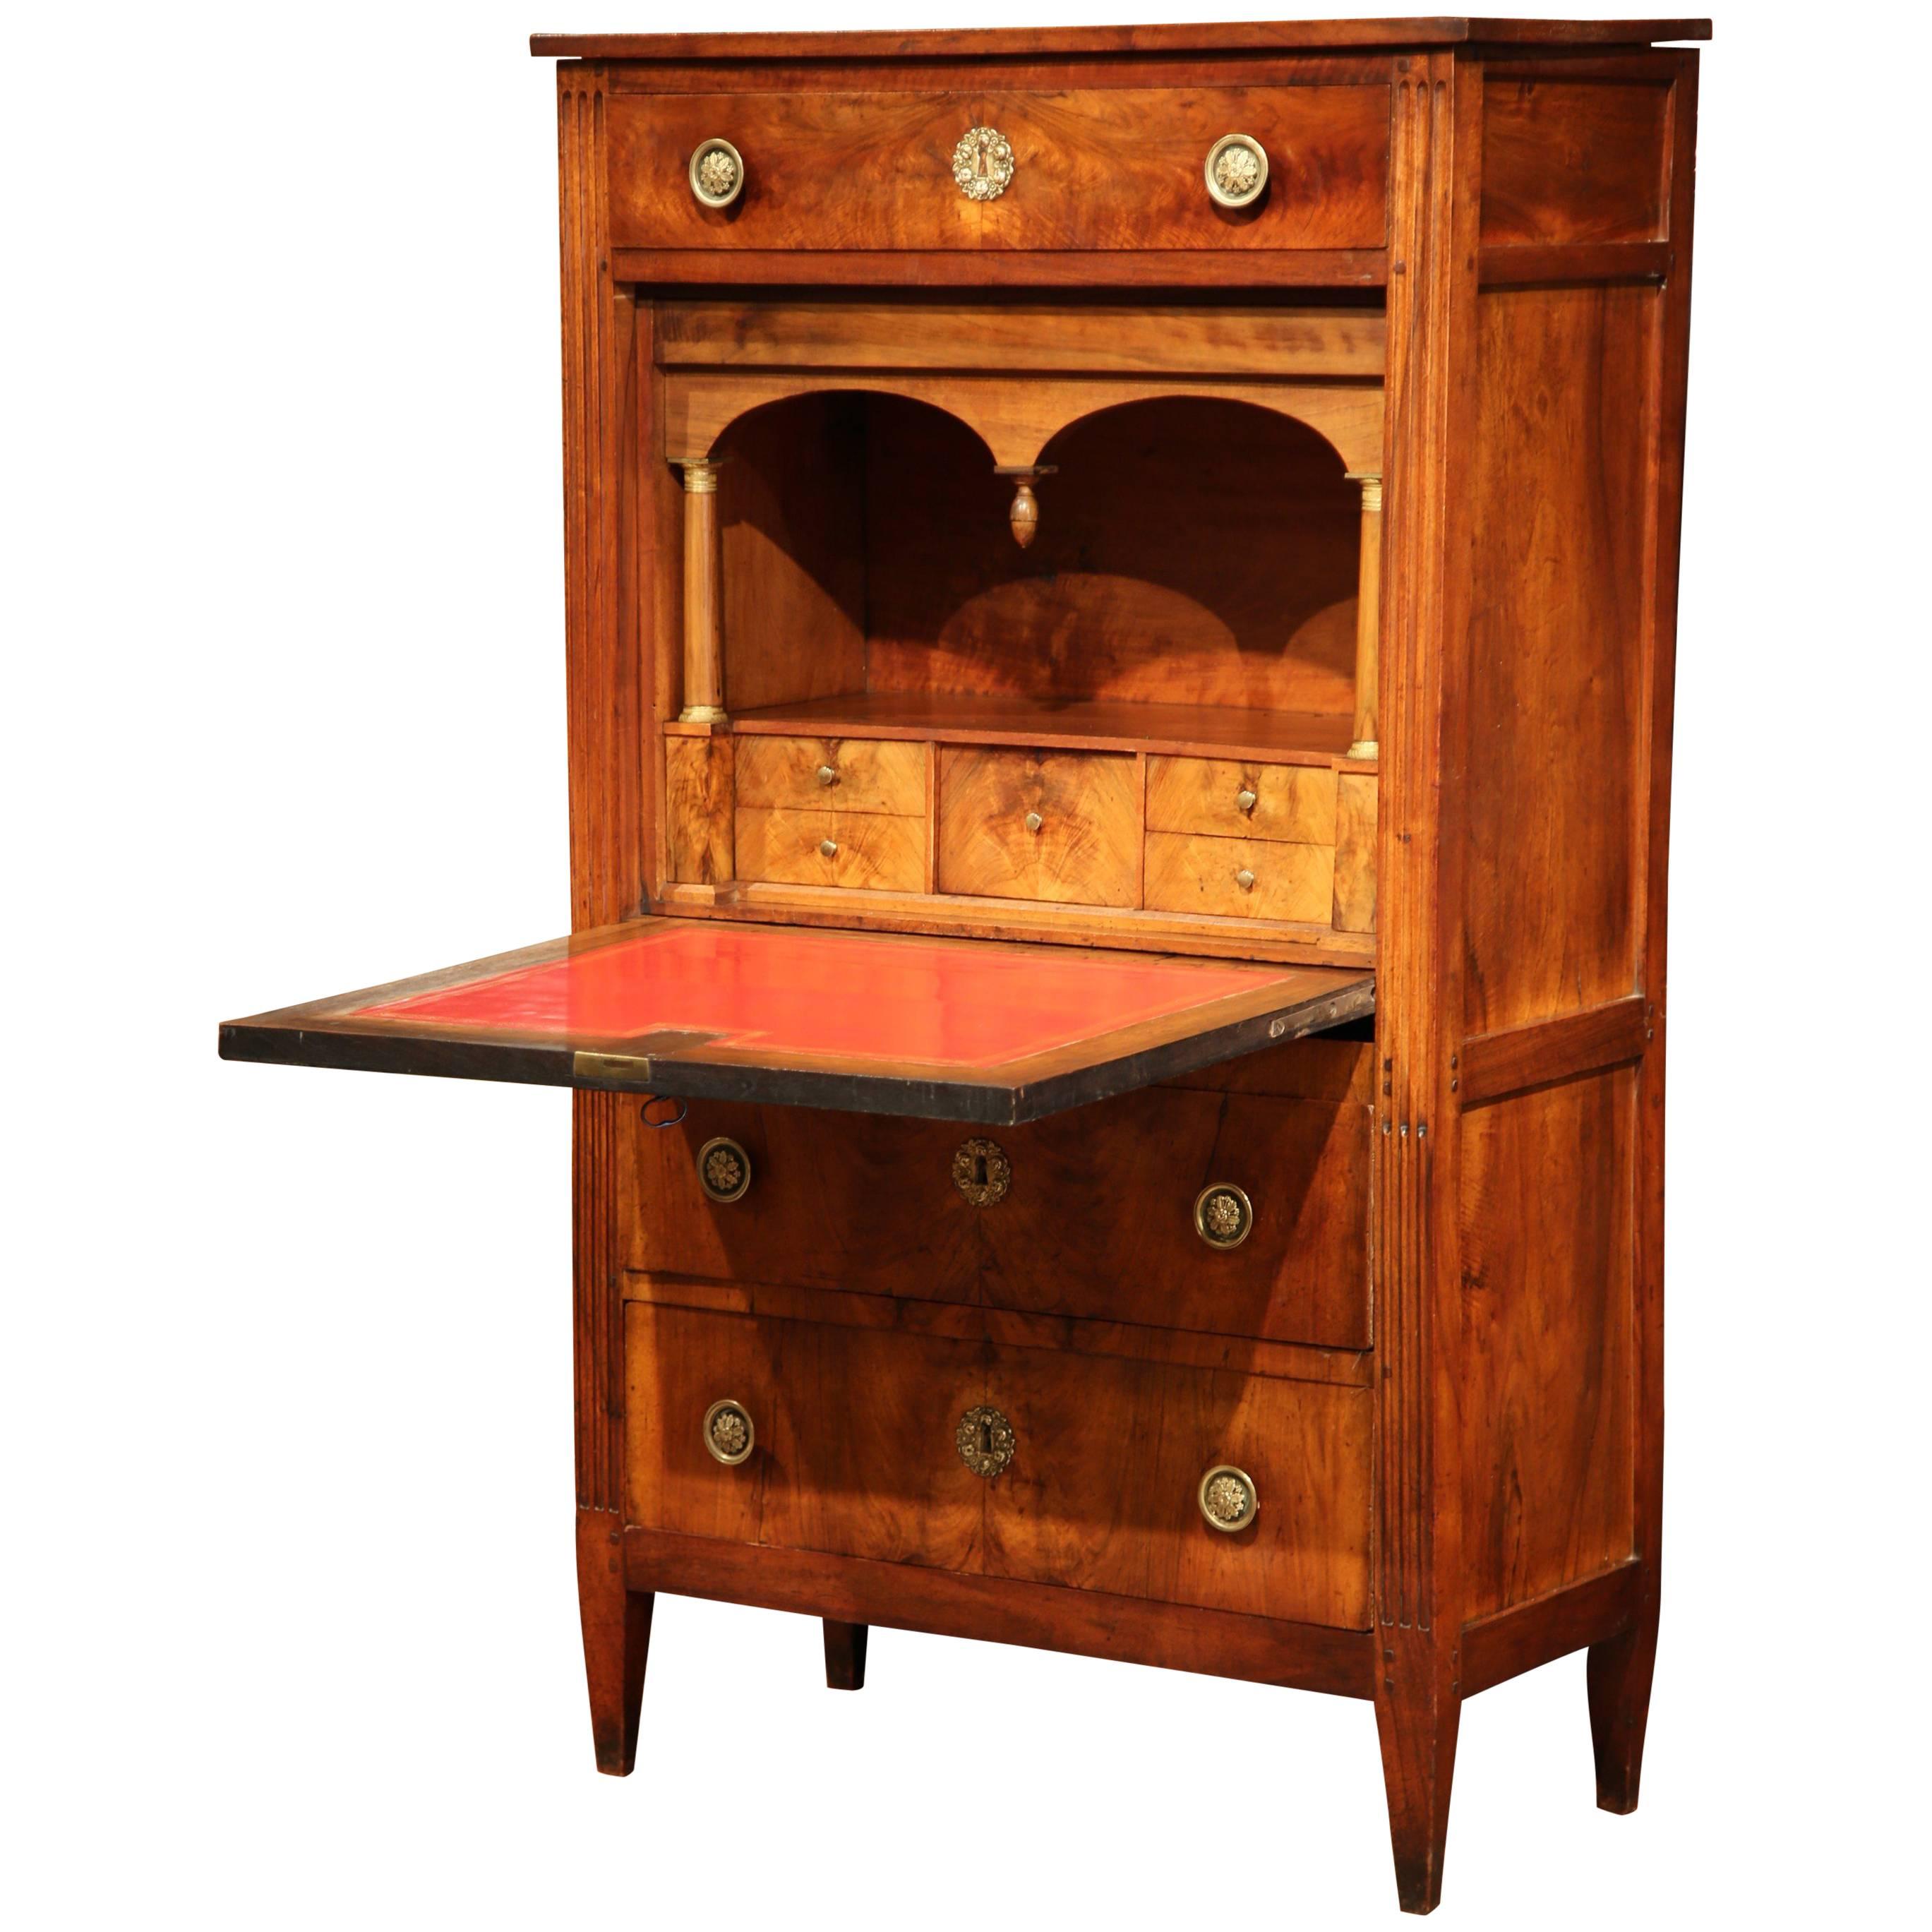 19th Century French Louis XVI Walnut Secretary Desk with Red Tooled Leather Top